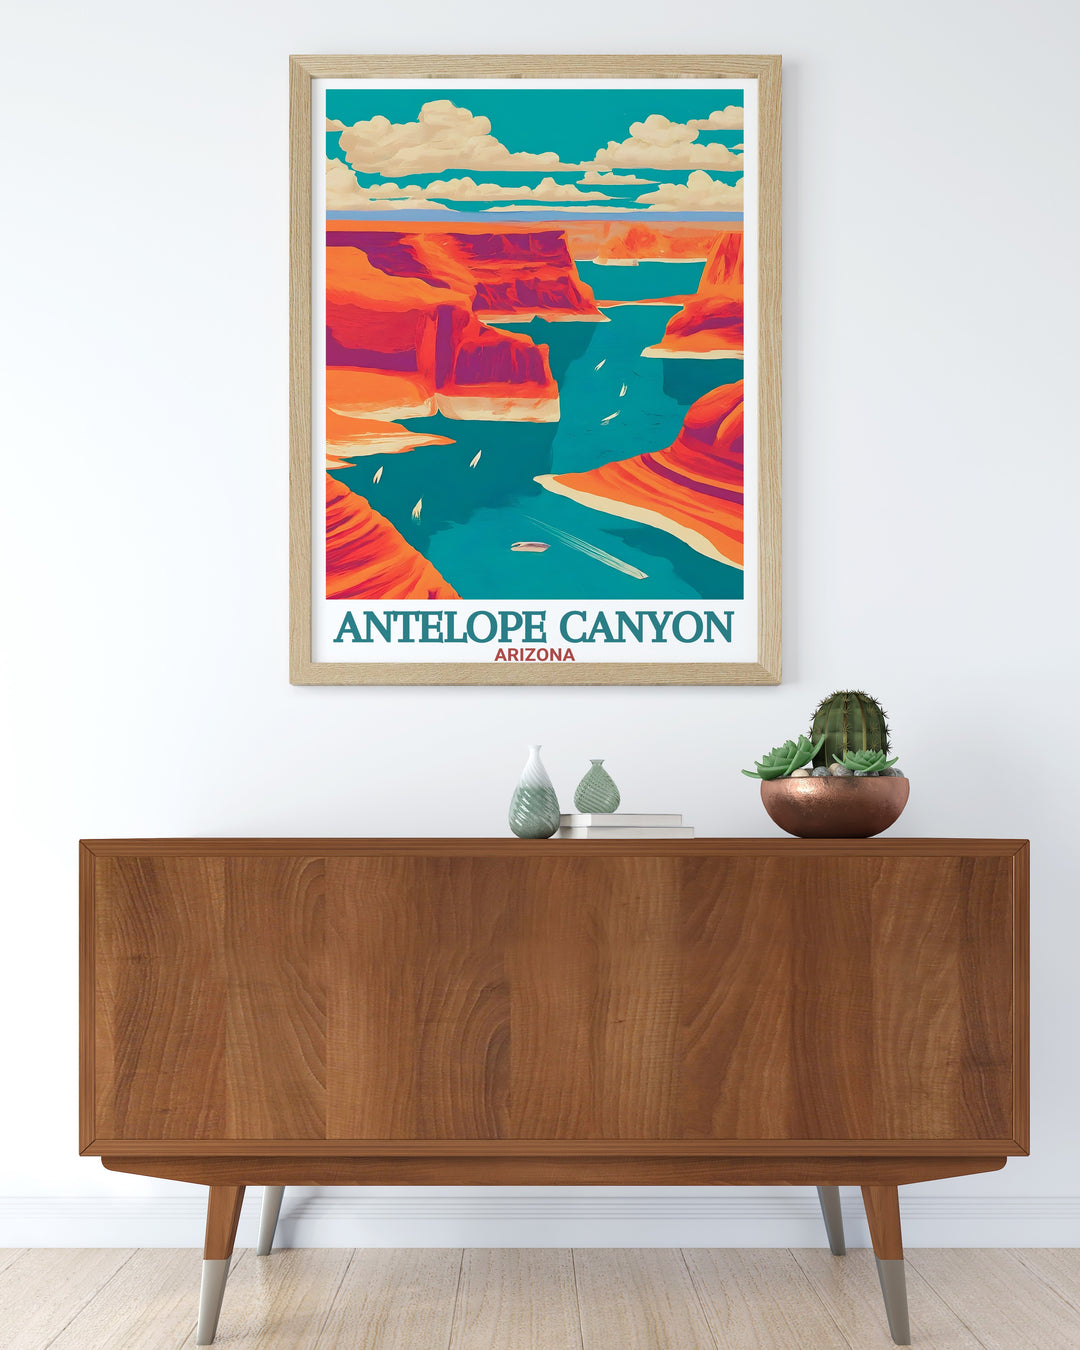 Arizona travel art highlighting the impressive scenery of Lake Powell with its vibrant colors and serene waters perfect for enhancing any room with a piece of the American Southwest.